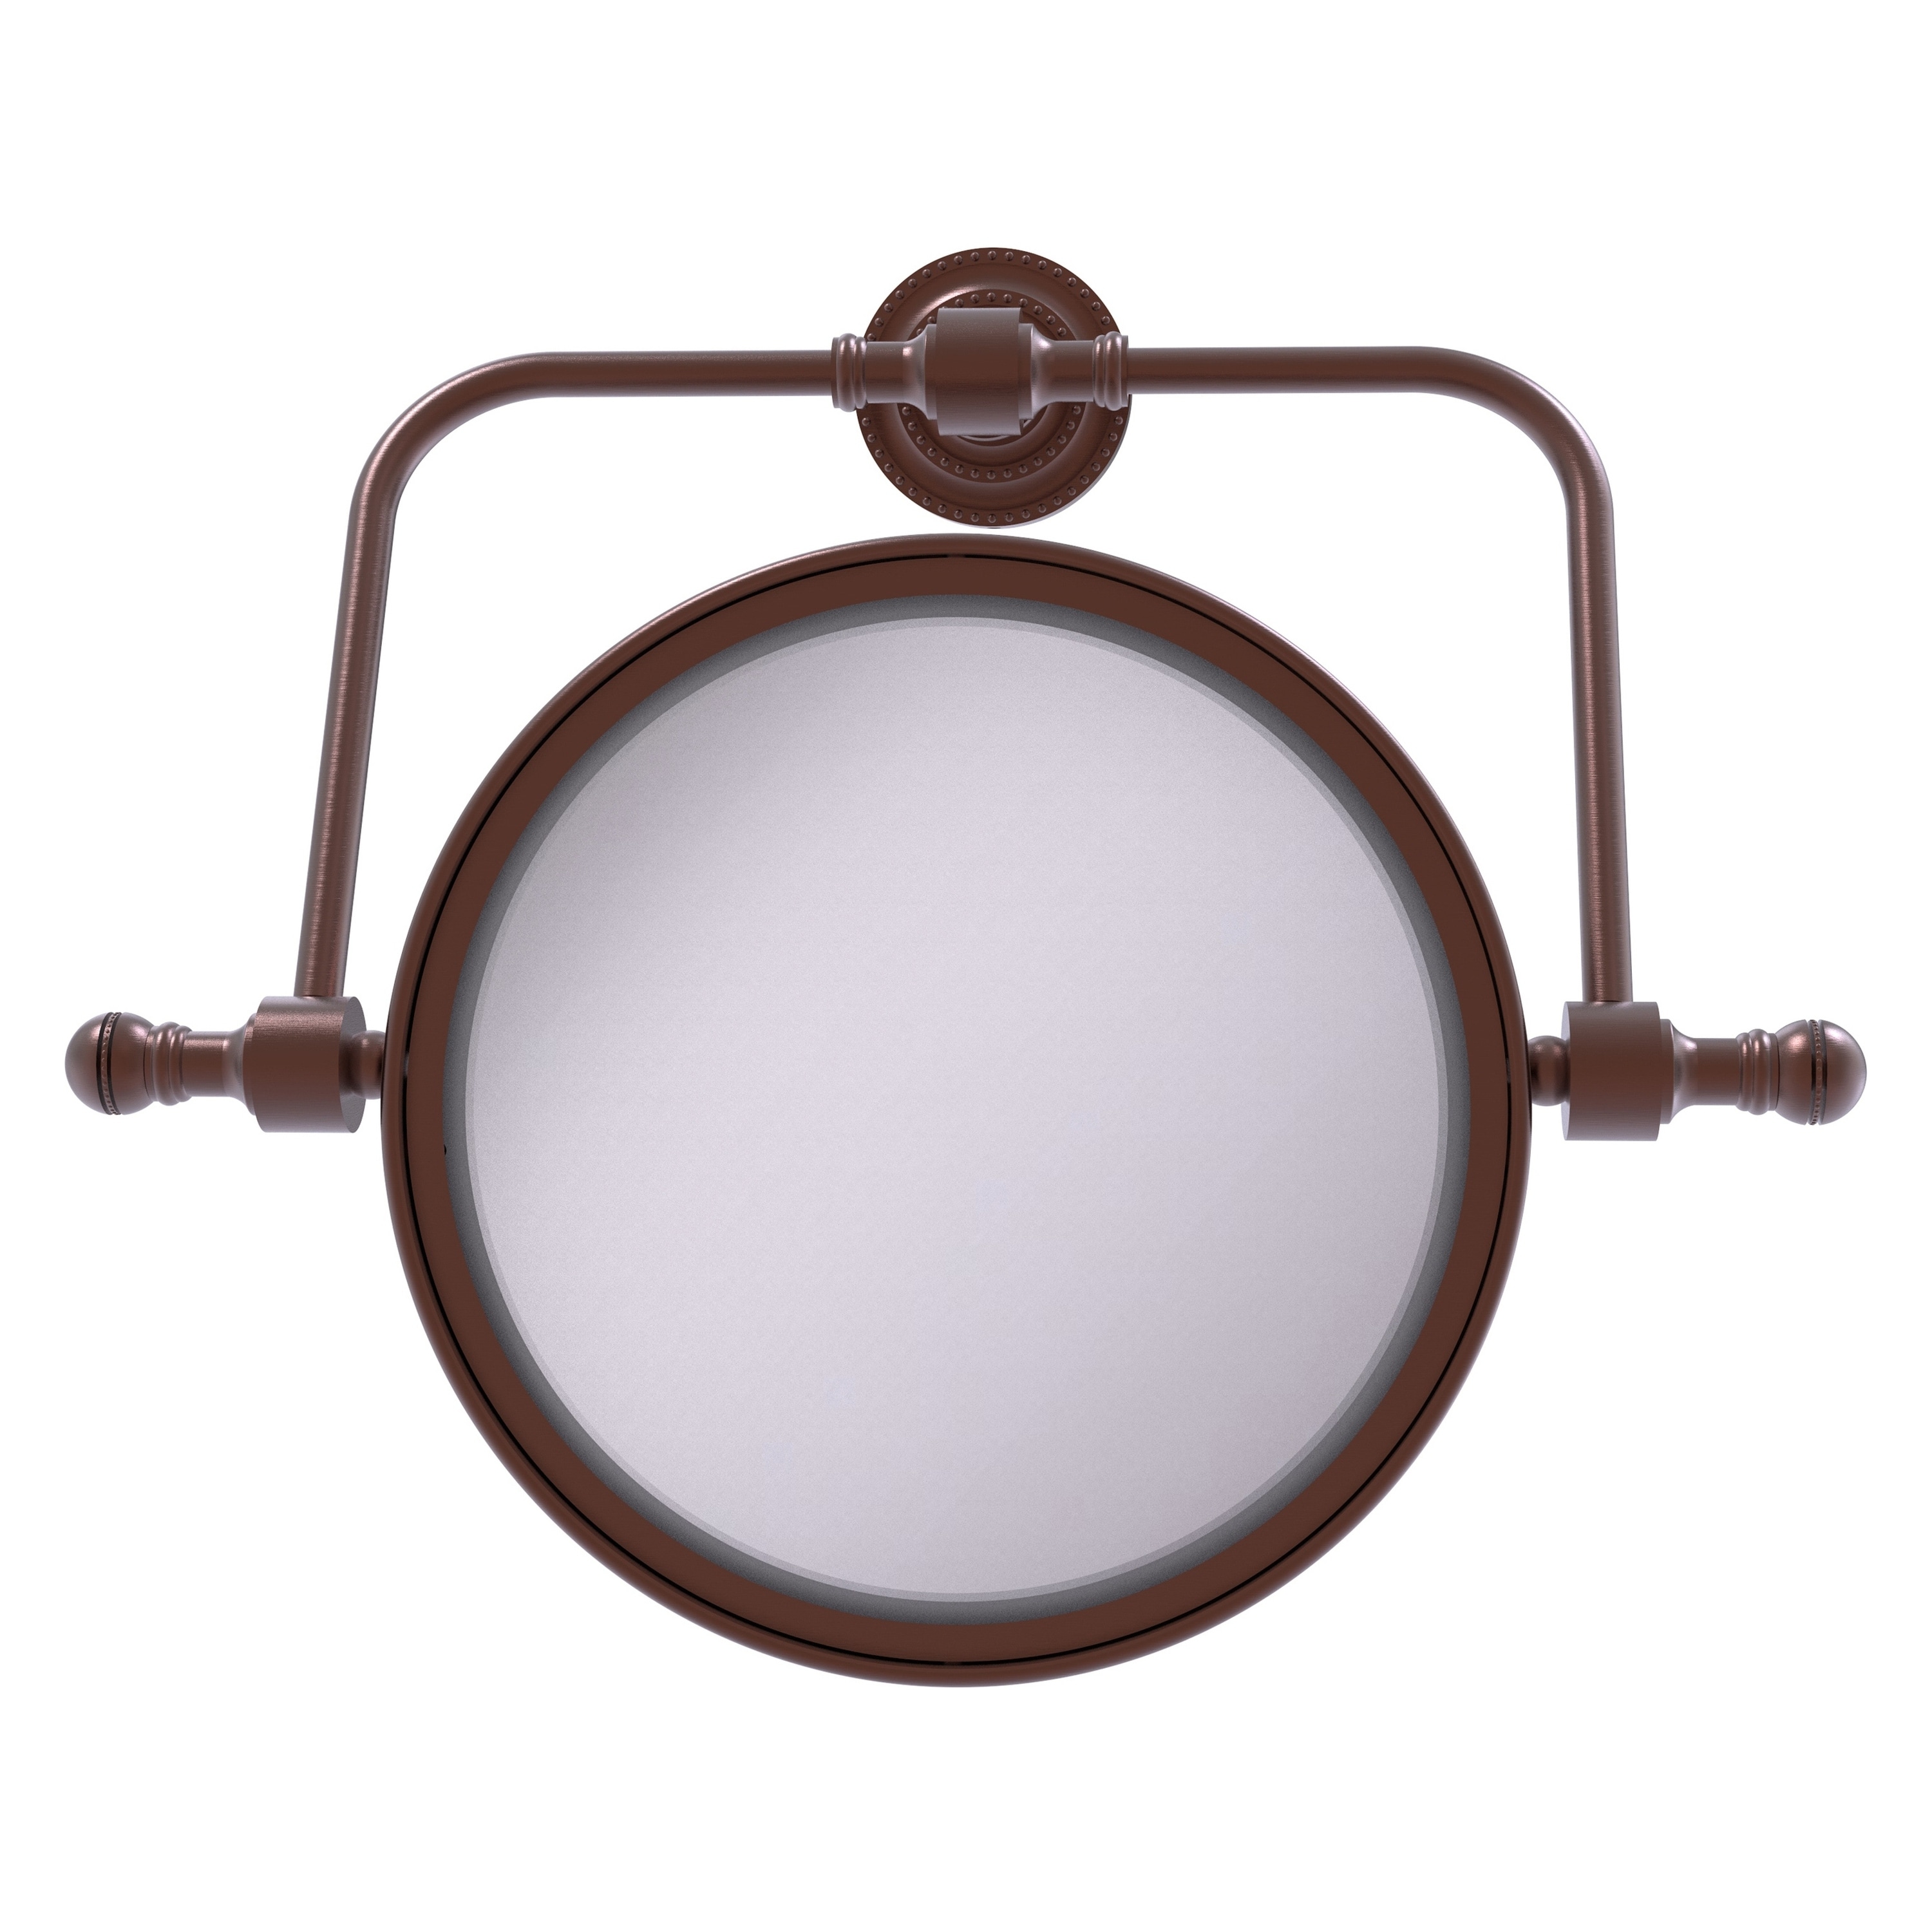 Retro Dot 7-in x 8-in Antique Copper Double-sided 2X Magnifying Wall-mounted Vanity Mirror | - Allied Brass RDM-4/2X-CA